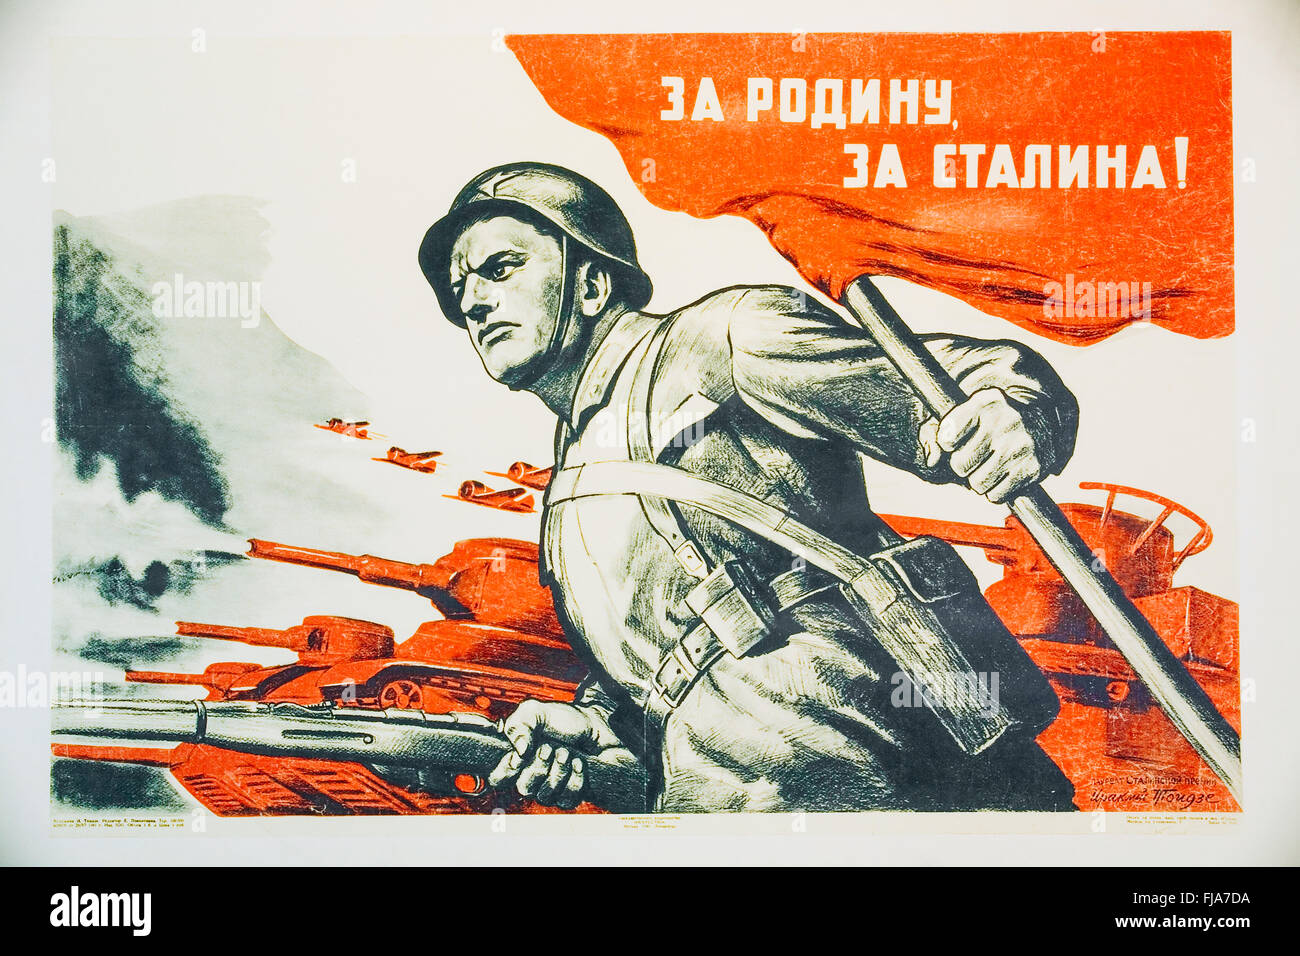 Soviet Russian patriotic propaganda poster from World War II with image of soldier going on attack with rifle and flag Stock Photo